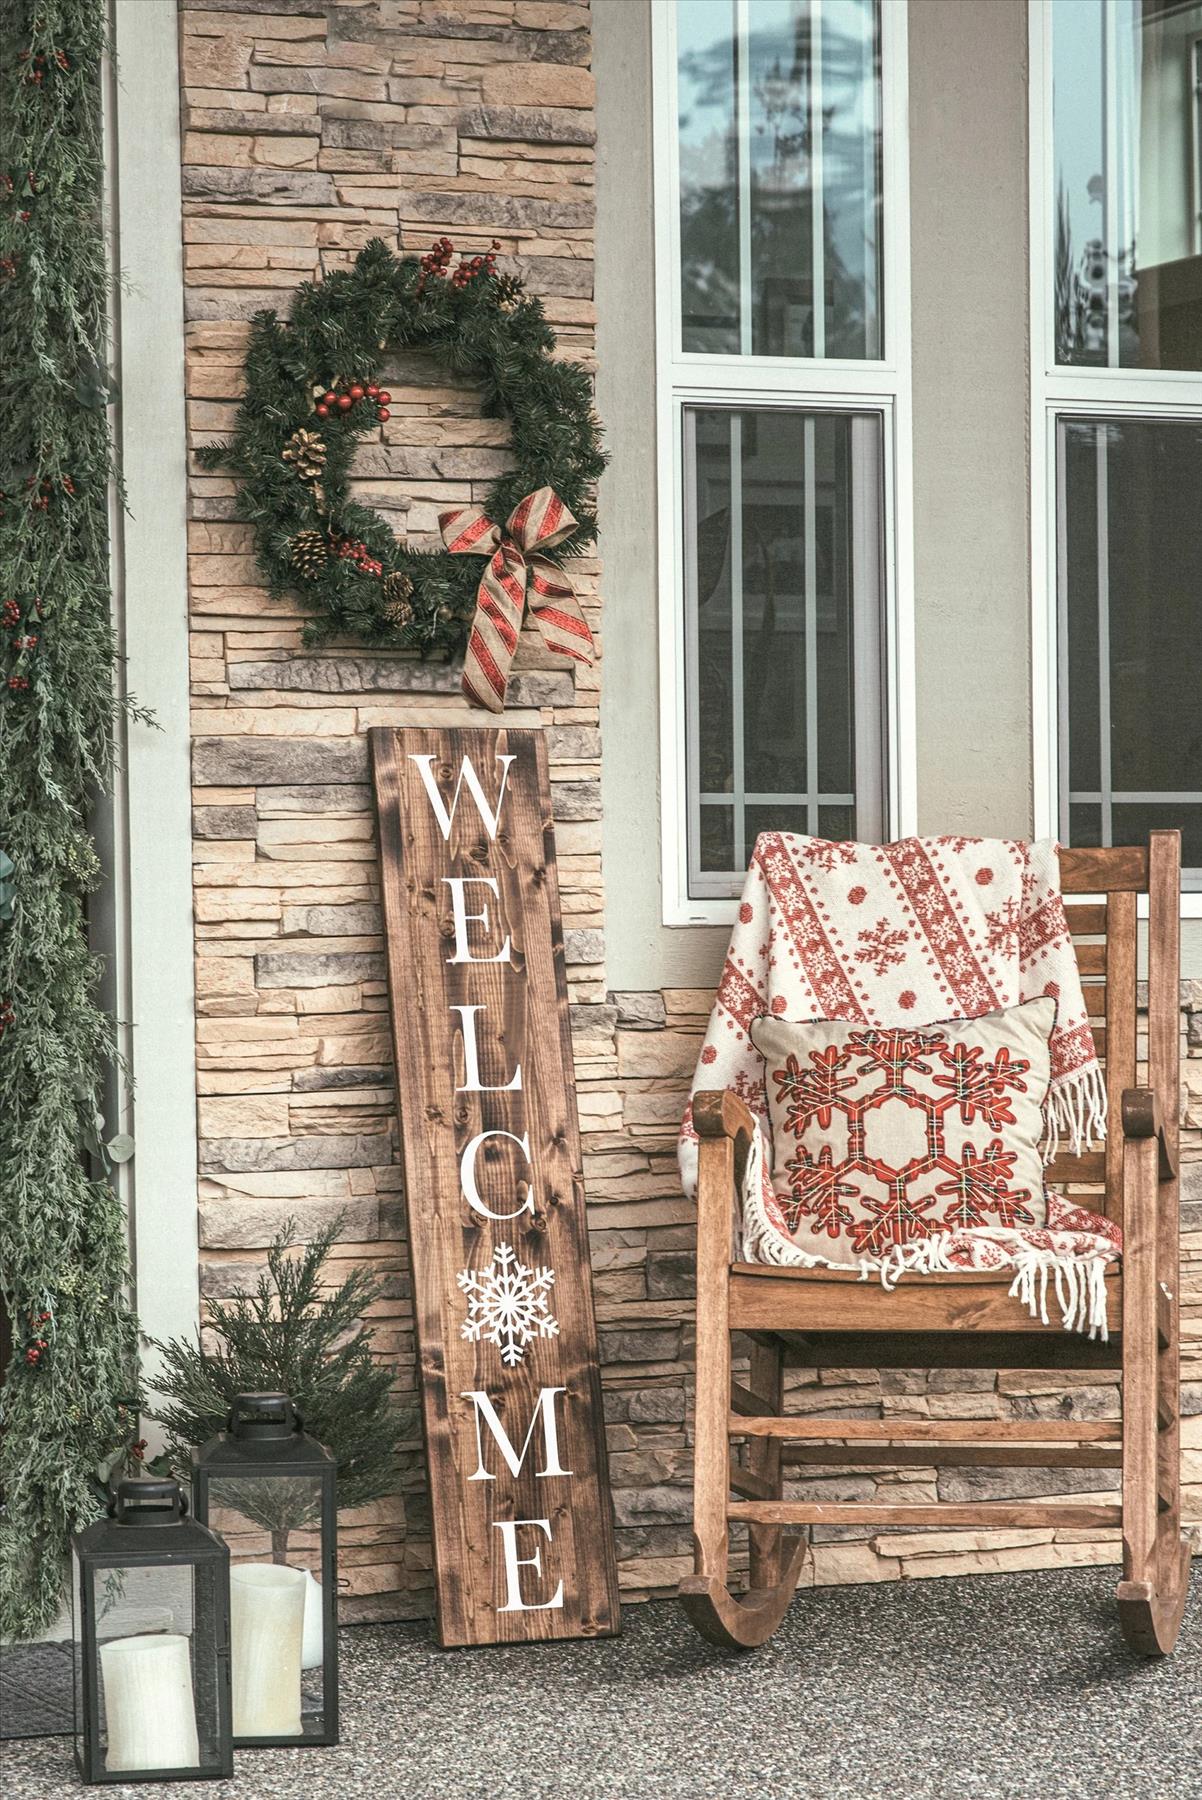 Best Christmas Porch Decorations for Christmas outdoor decor